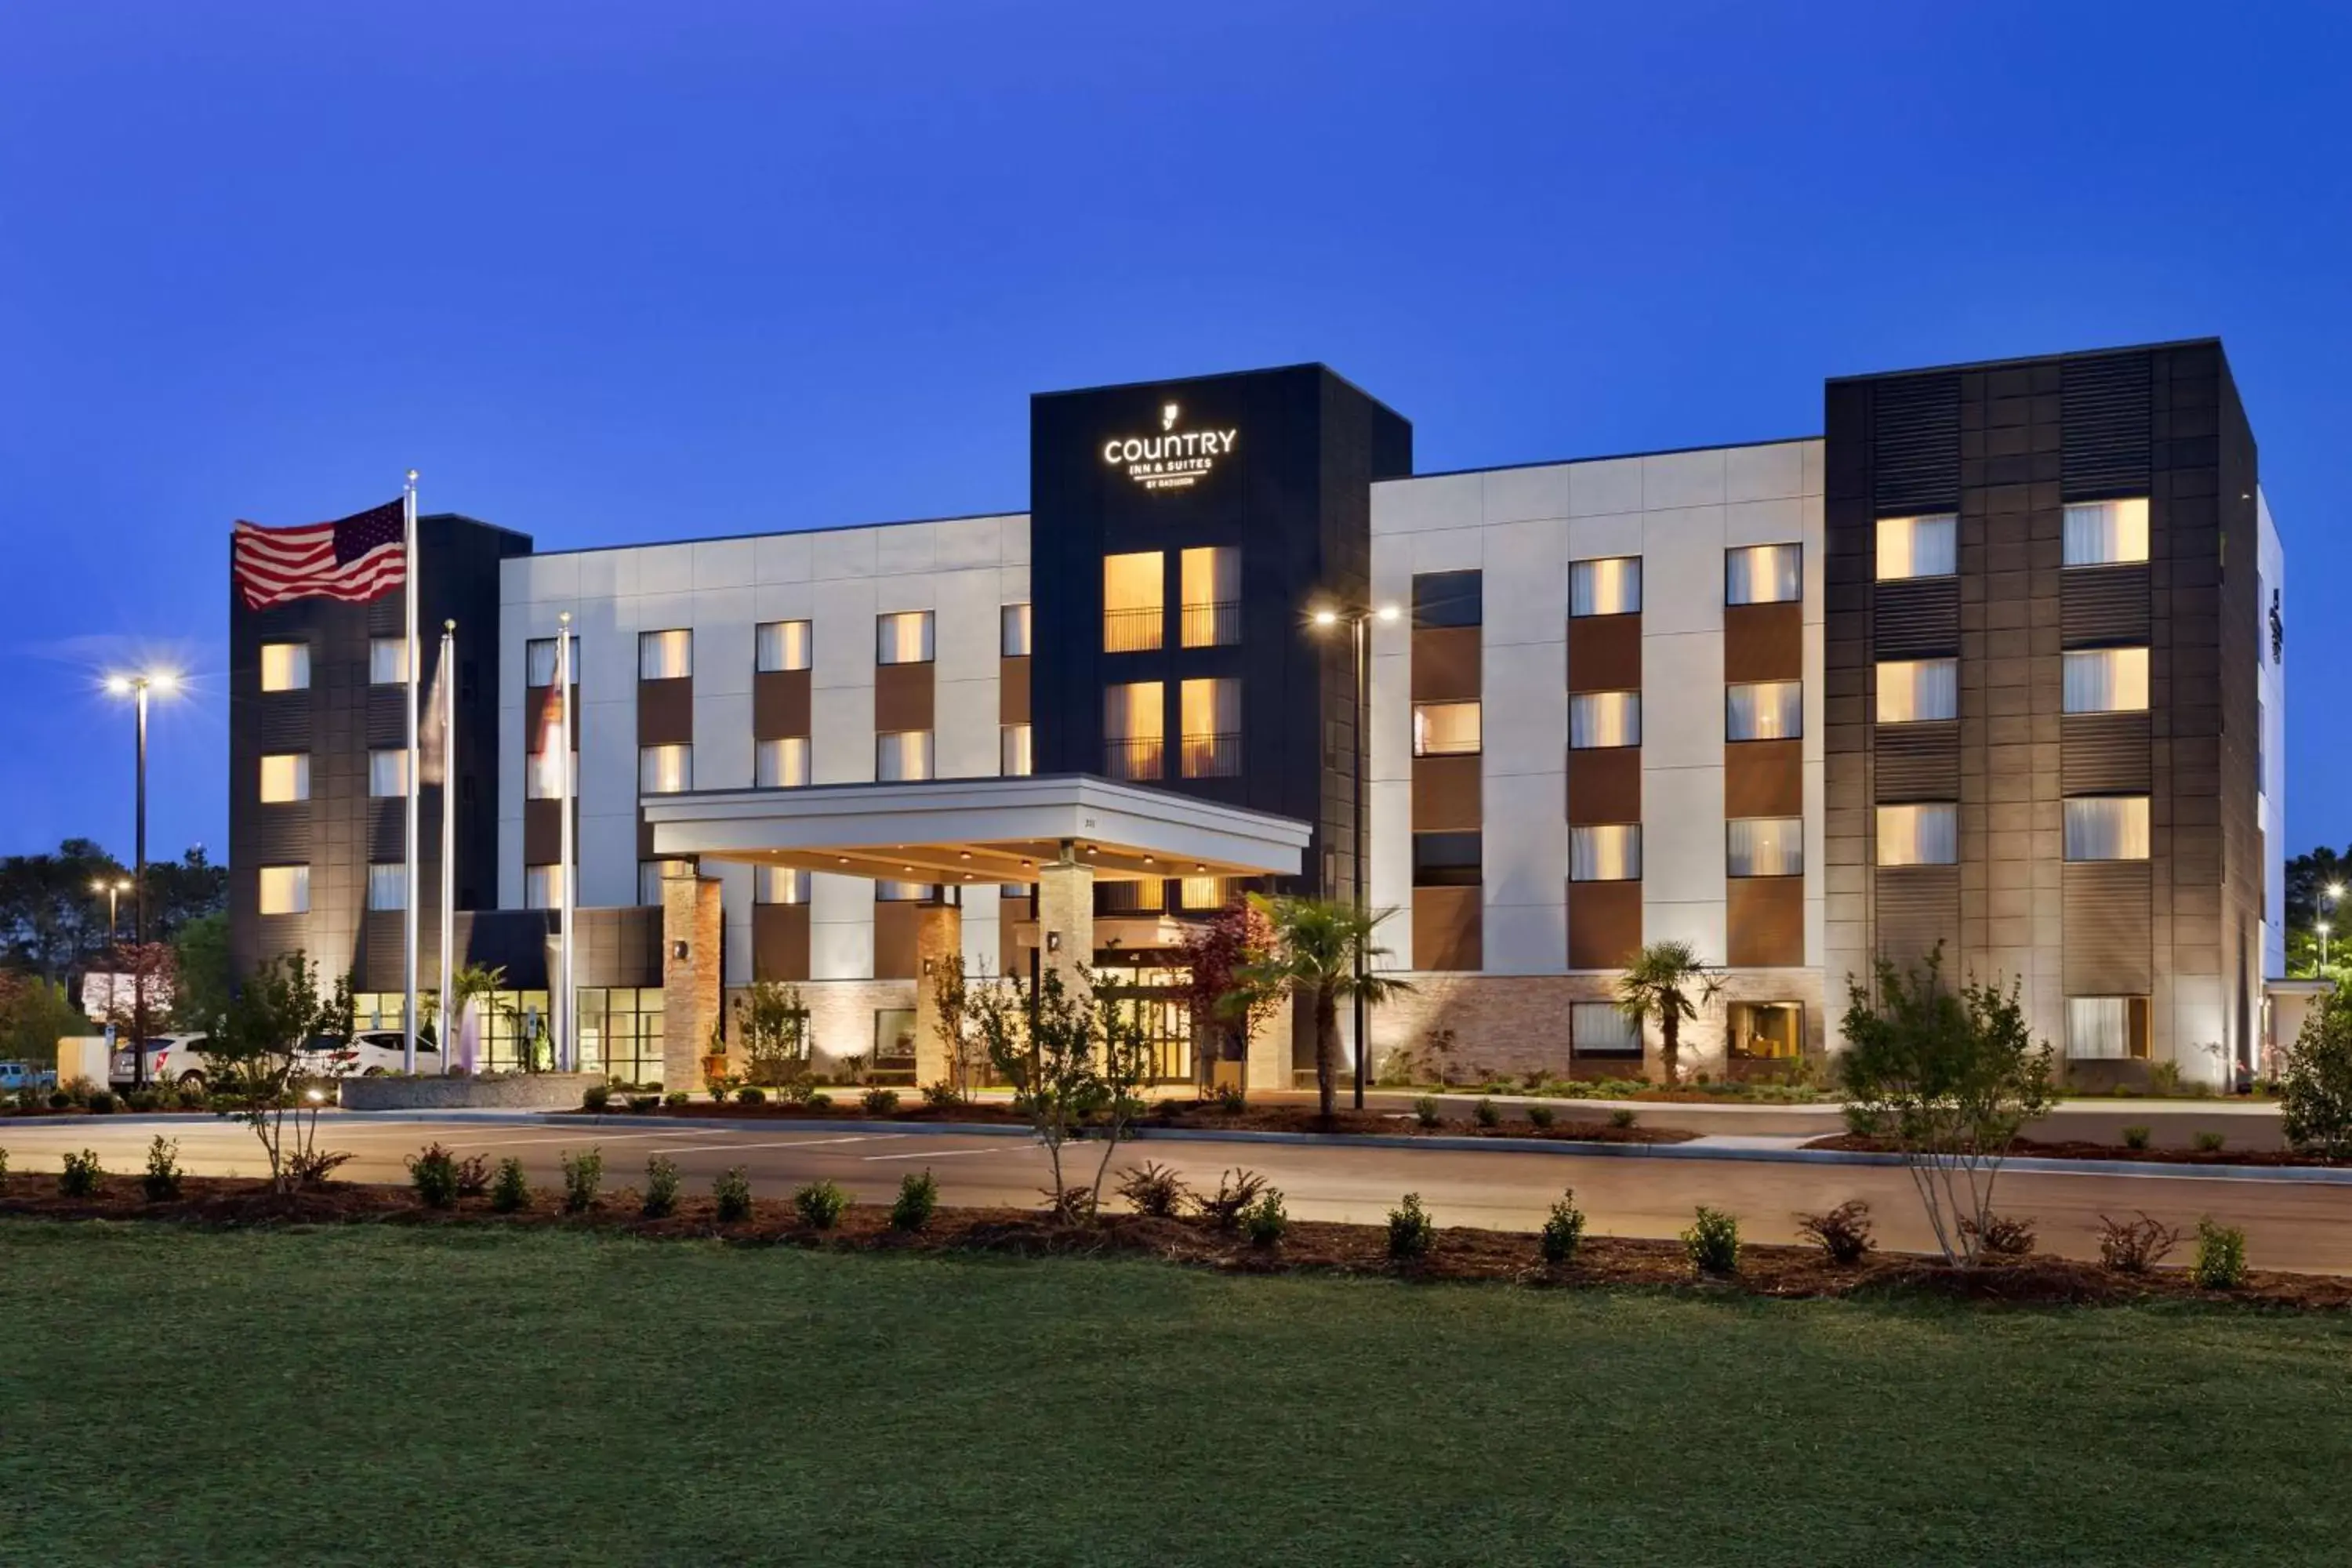 Property Building in Country Inn & Suites by Radisson, Smithfield-Selma, NC